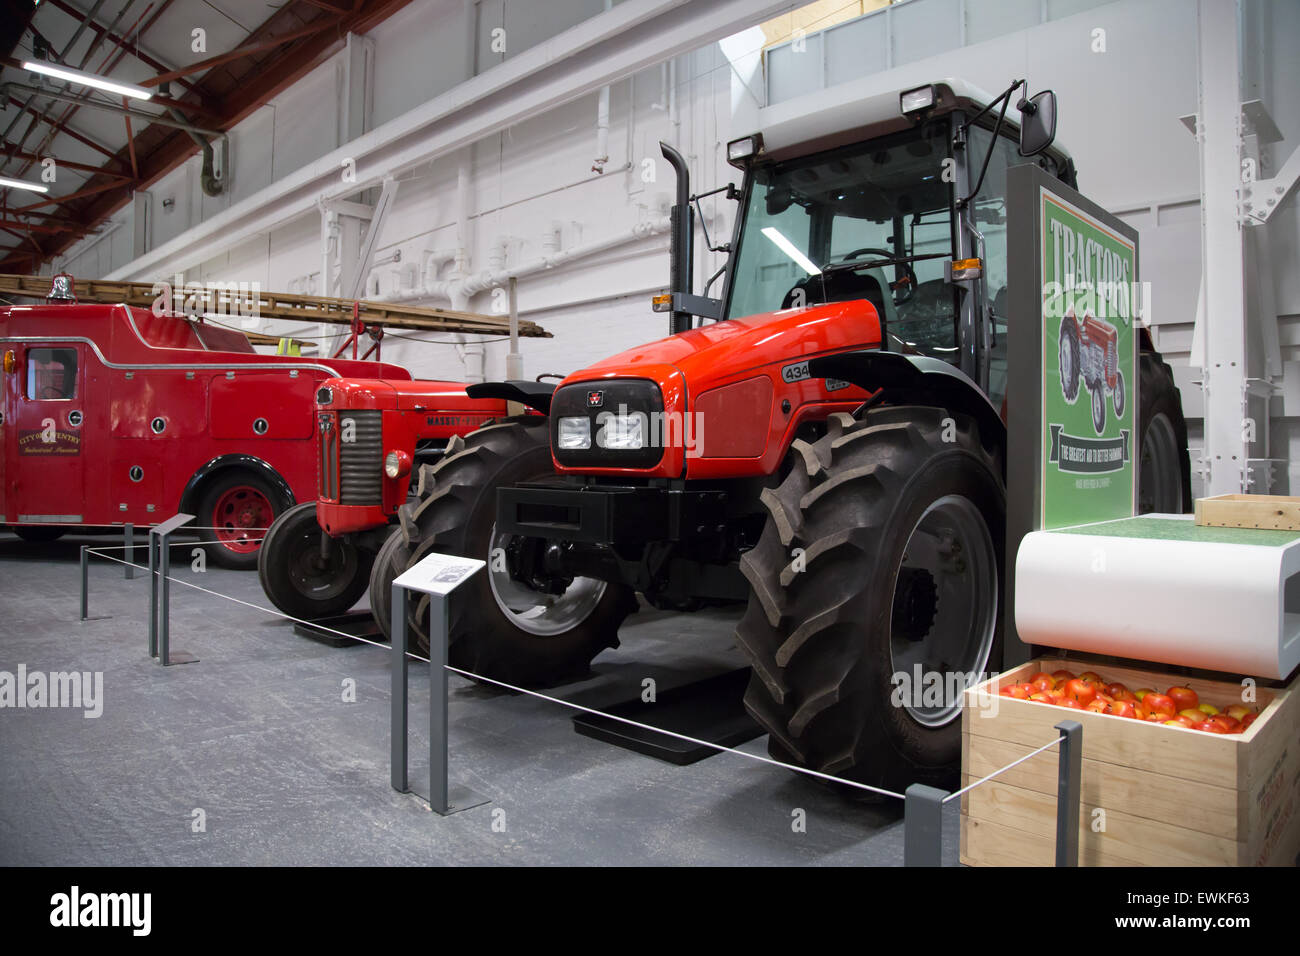 2002 Massey Ferguson tractor on display at Coventry Transport Museum alongside a vintage tractor Stock Photo